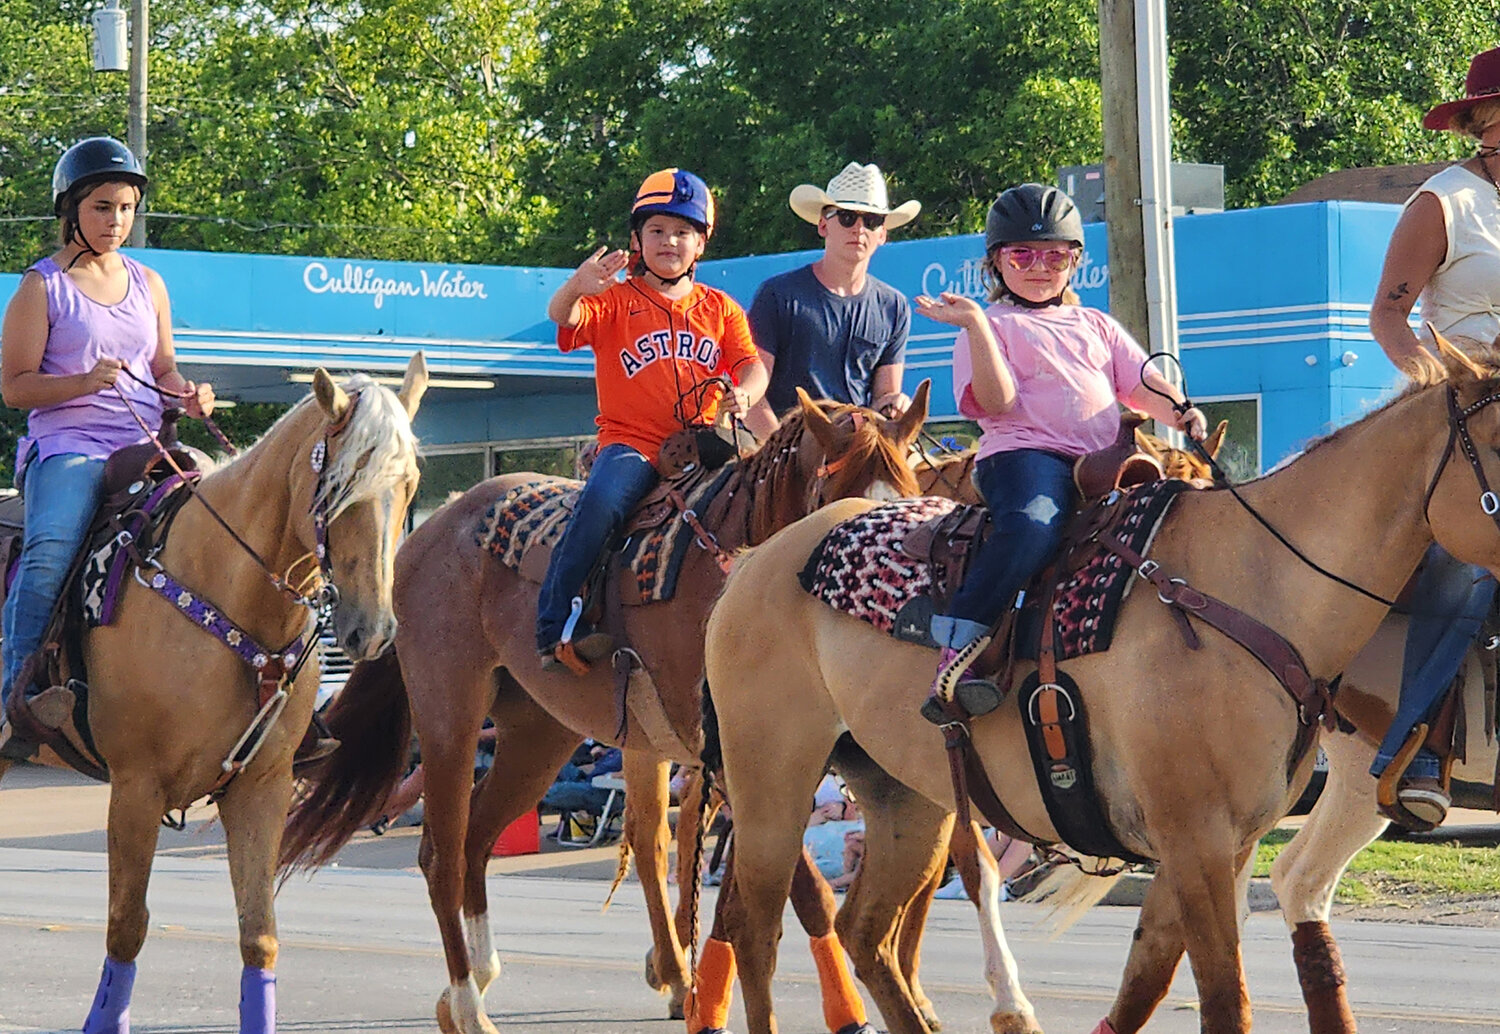 The Parker County Sheriff's Posse parade was held on June 3.